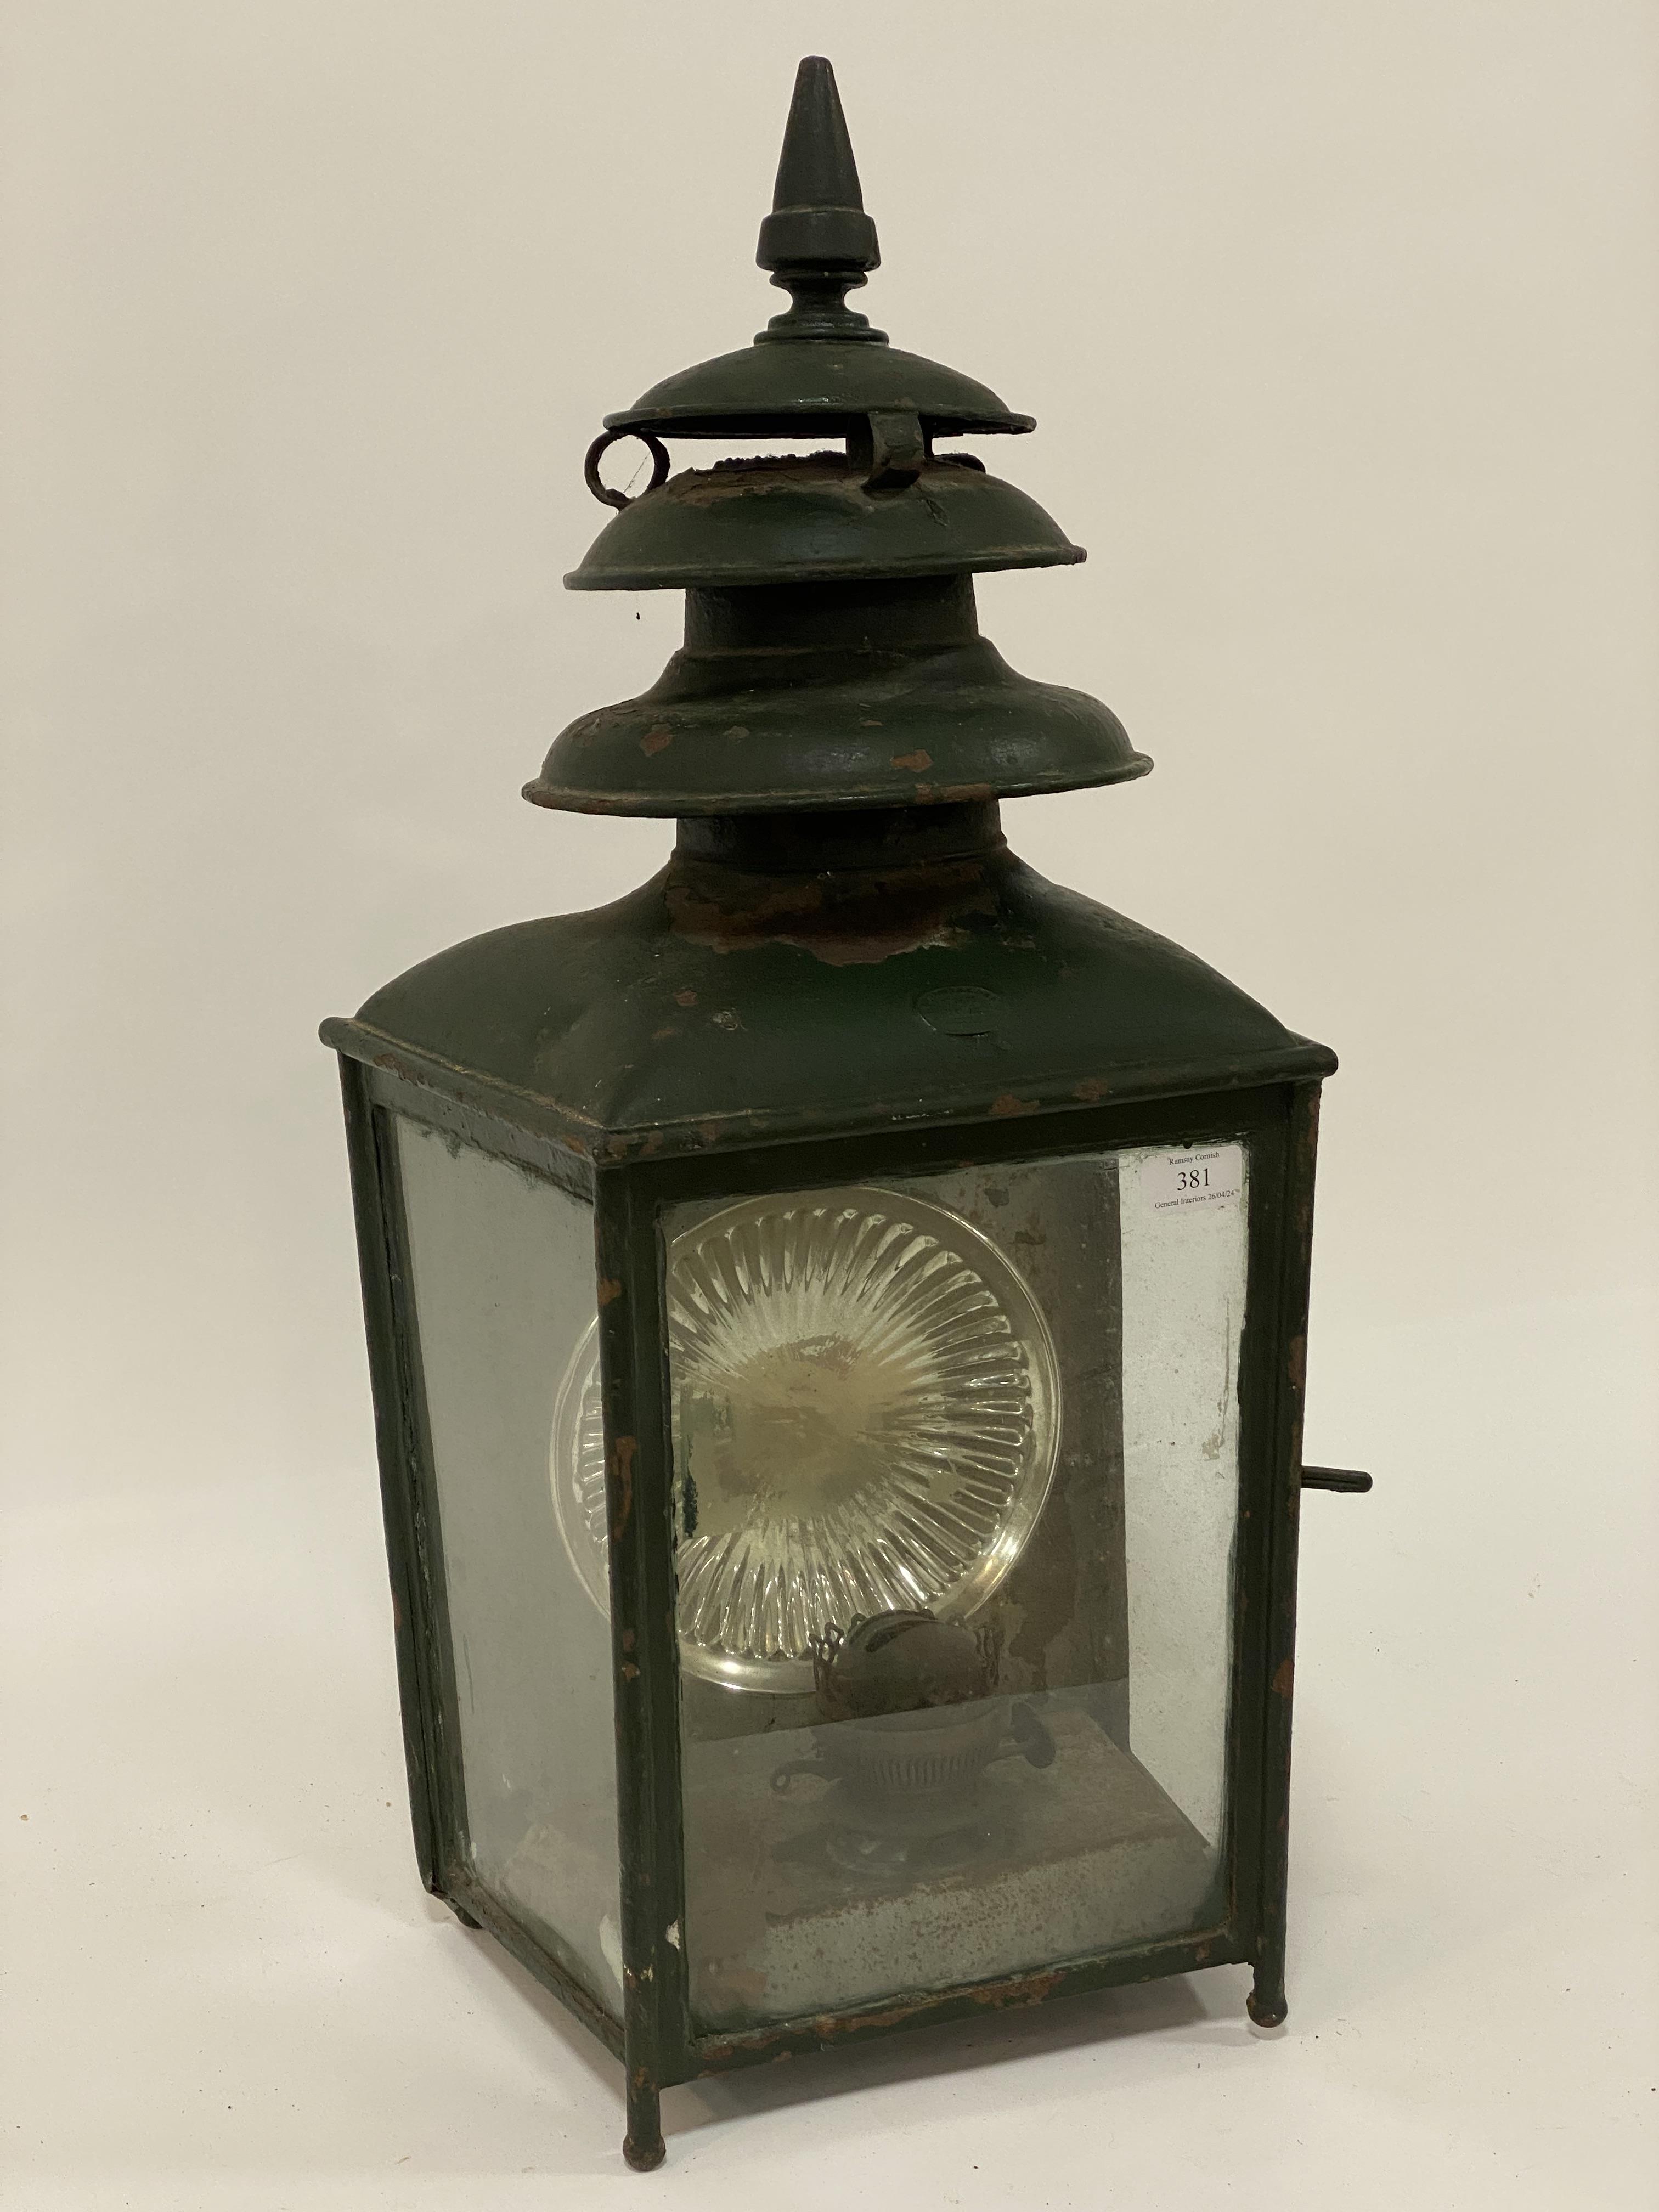 A 19th century green painted station wall lantern, bearing Pitter & Sons metal label, fiinial on